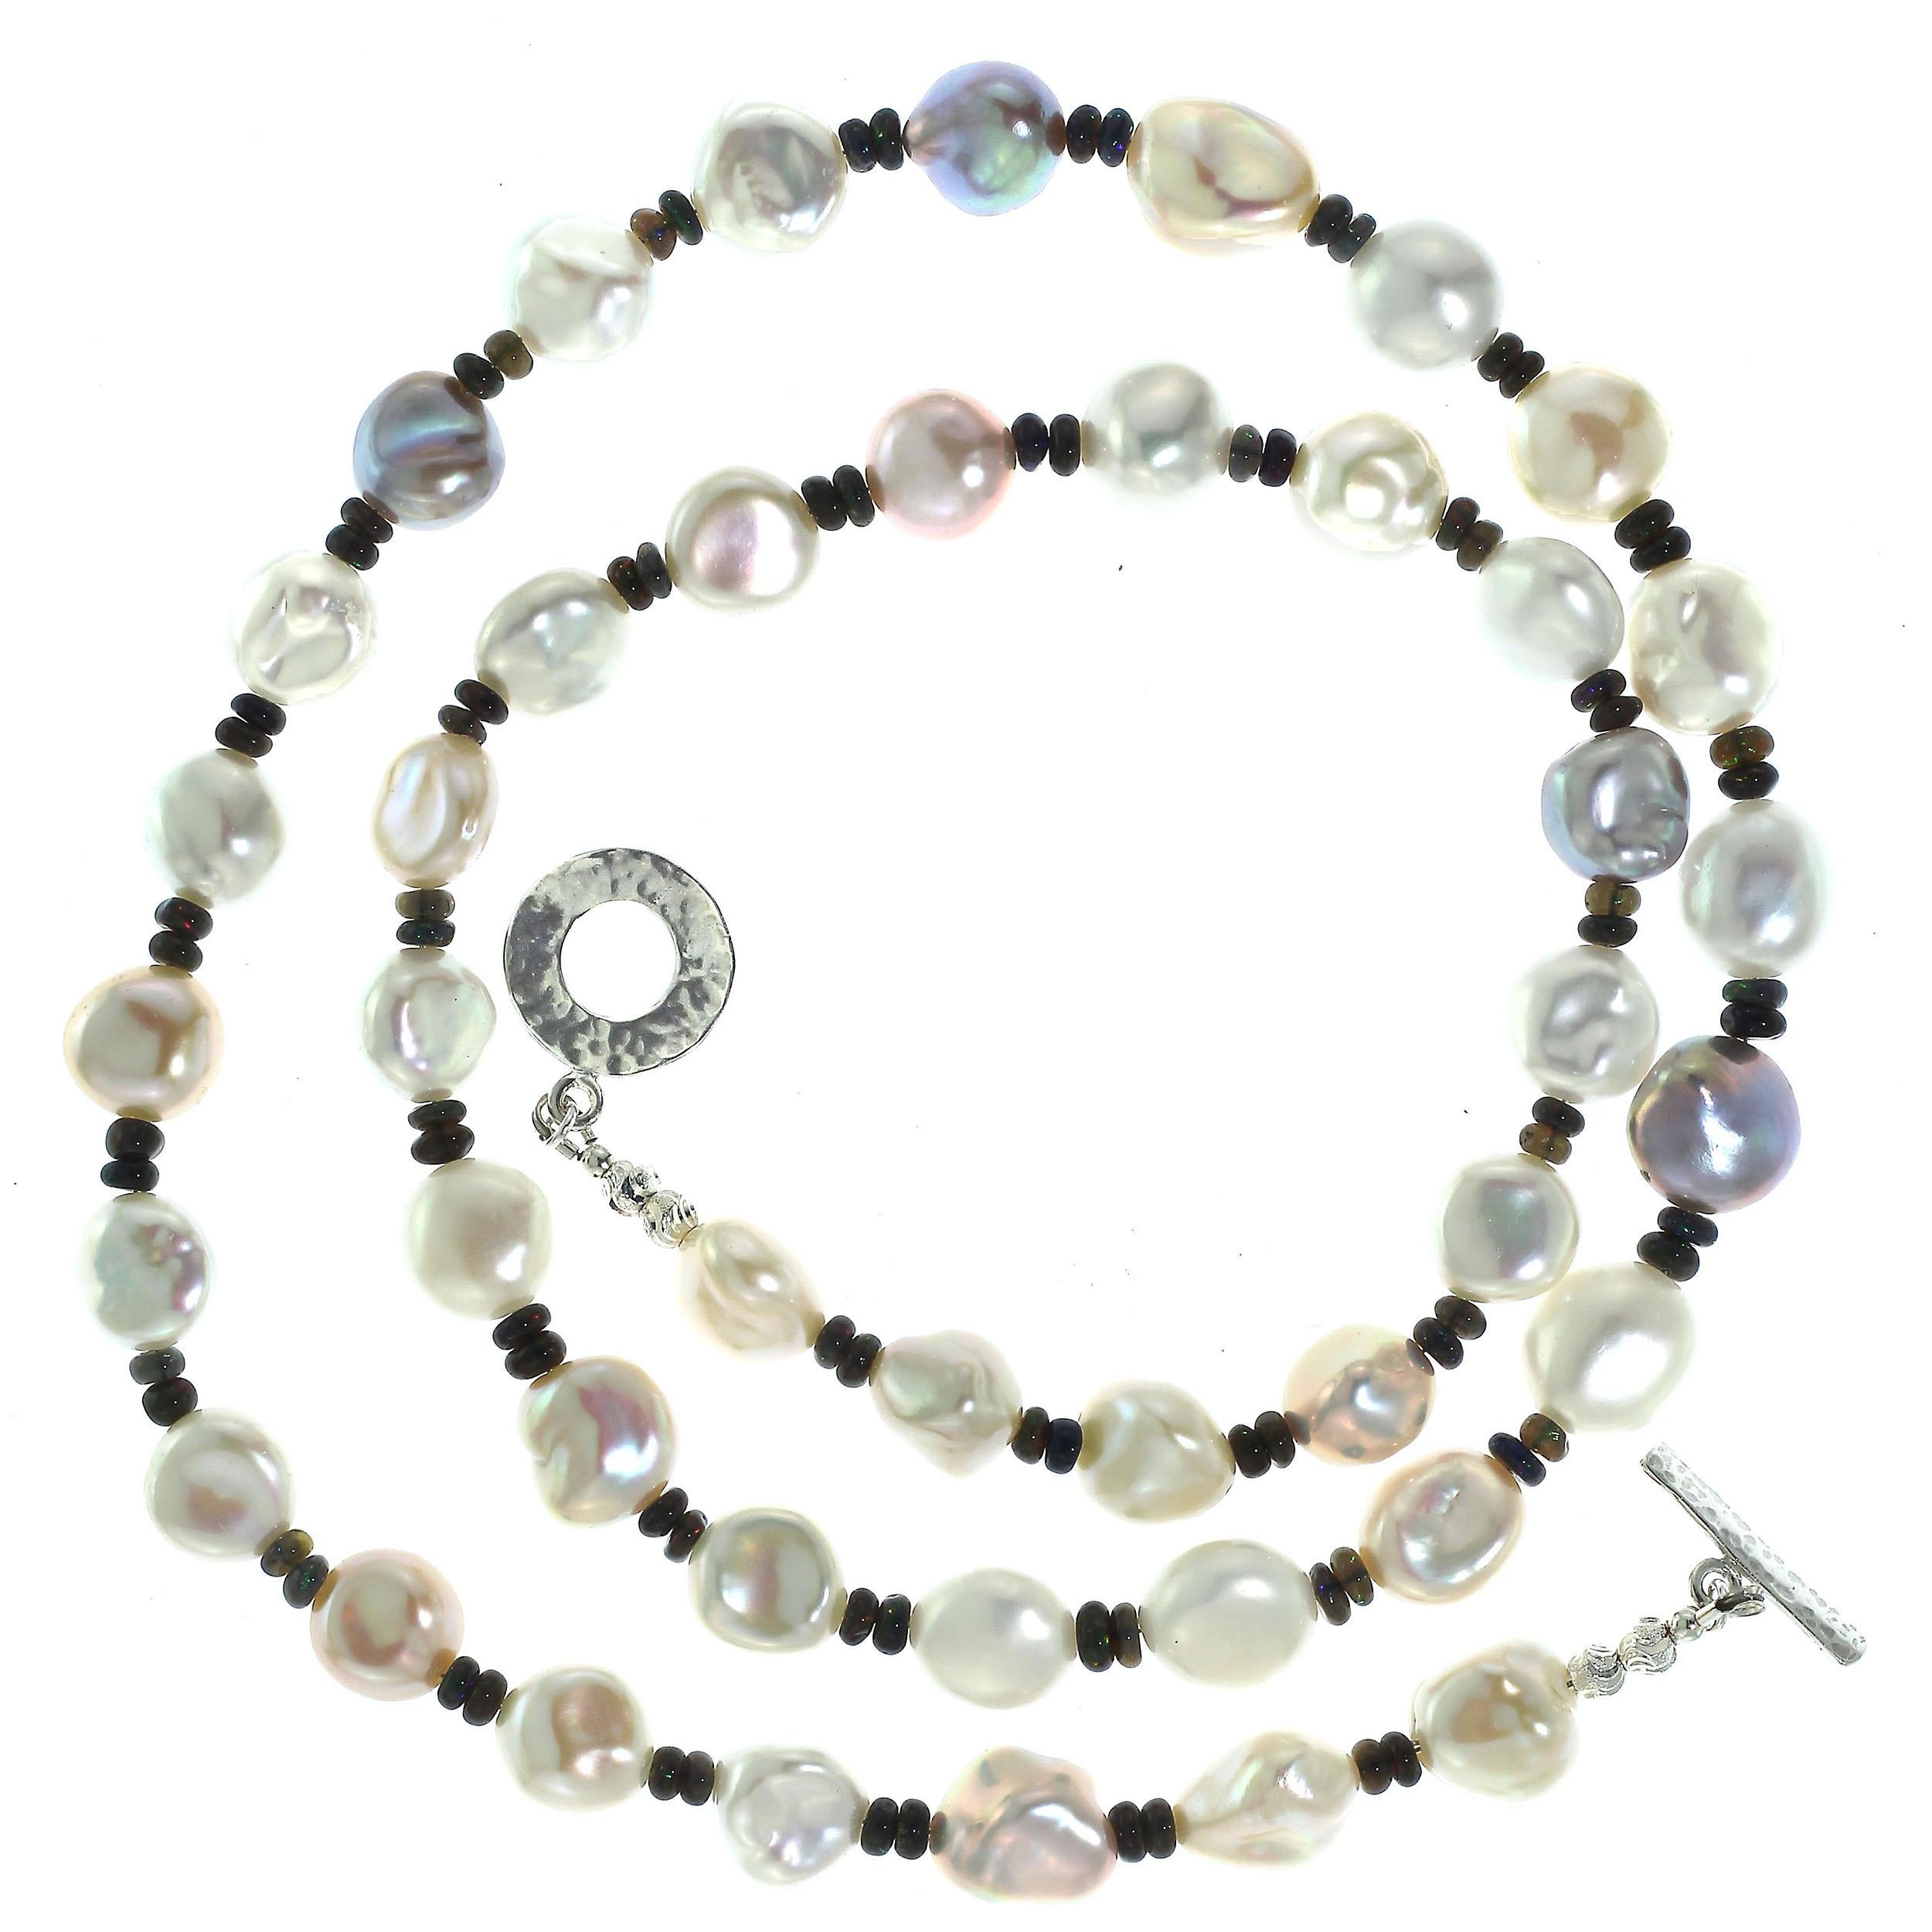 Women's or Men's Glowing, Freshwater Pearl Necklace with Black Opal Accents